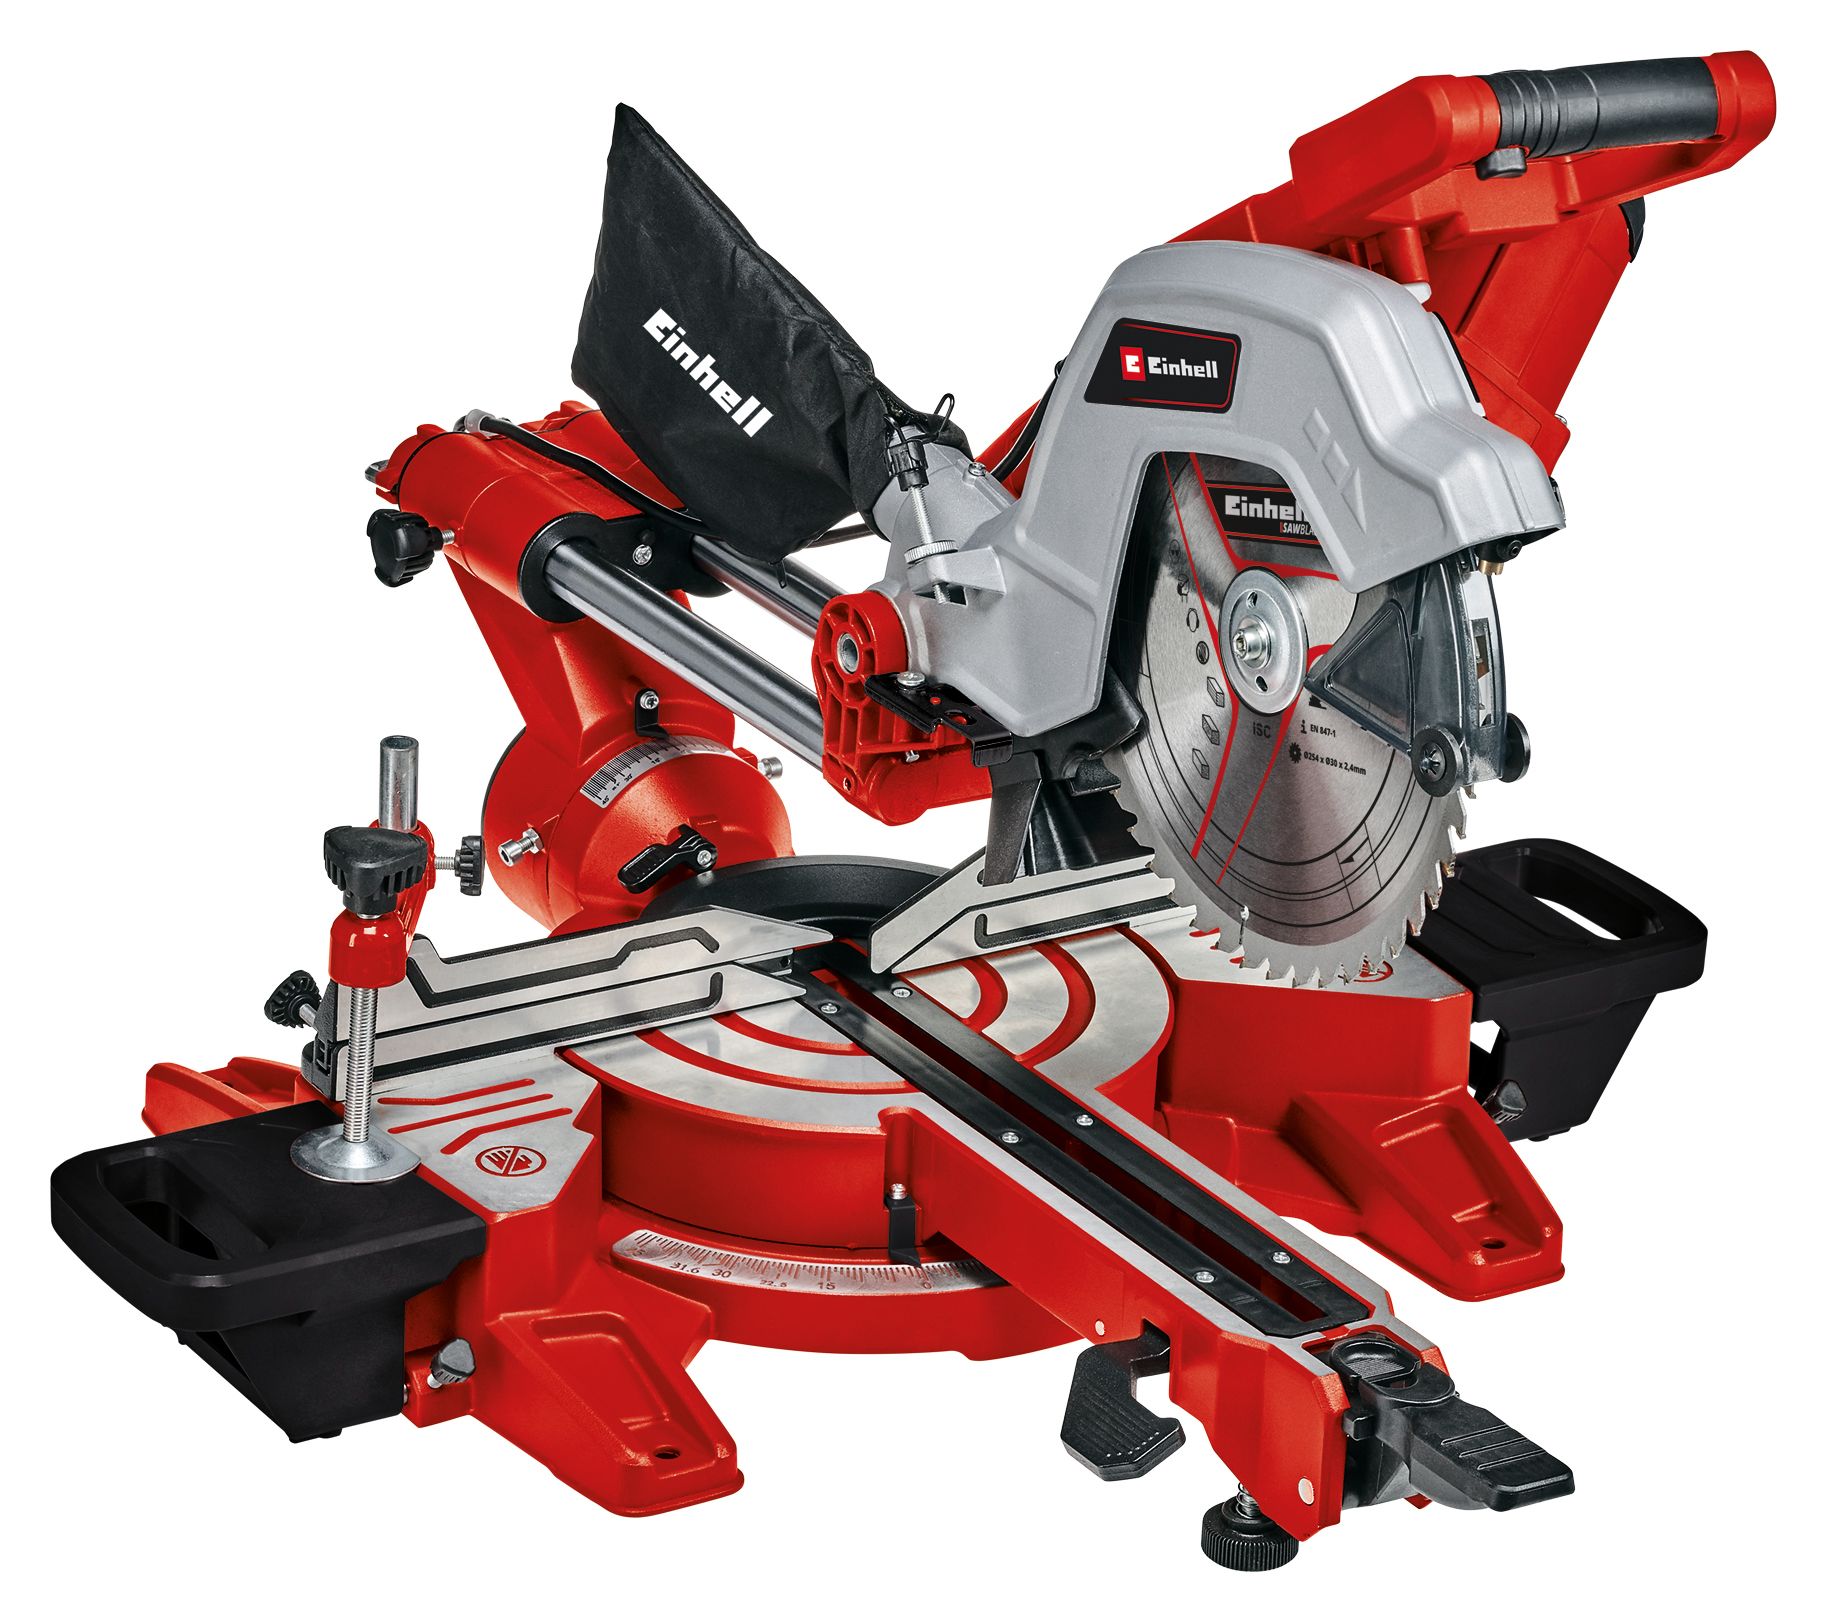 Image of Einhell Expert TE-SM 254 Dual 254mm Corded Sliding Double Bevel Mitre Saw - 2100W